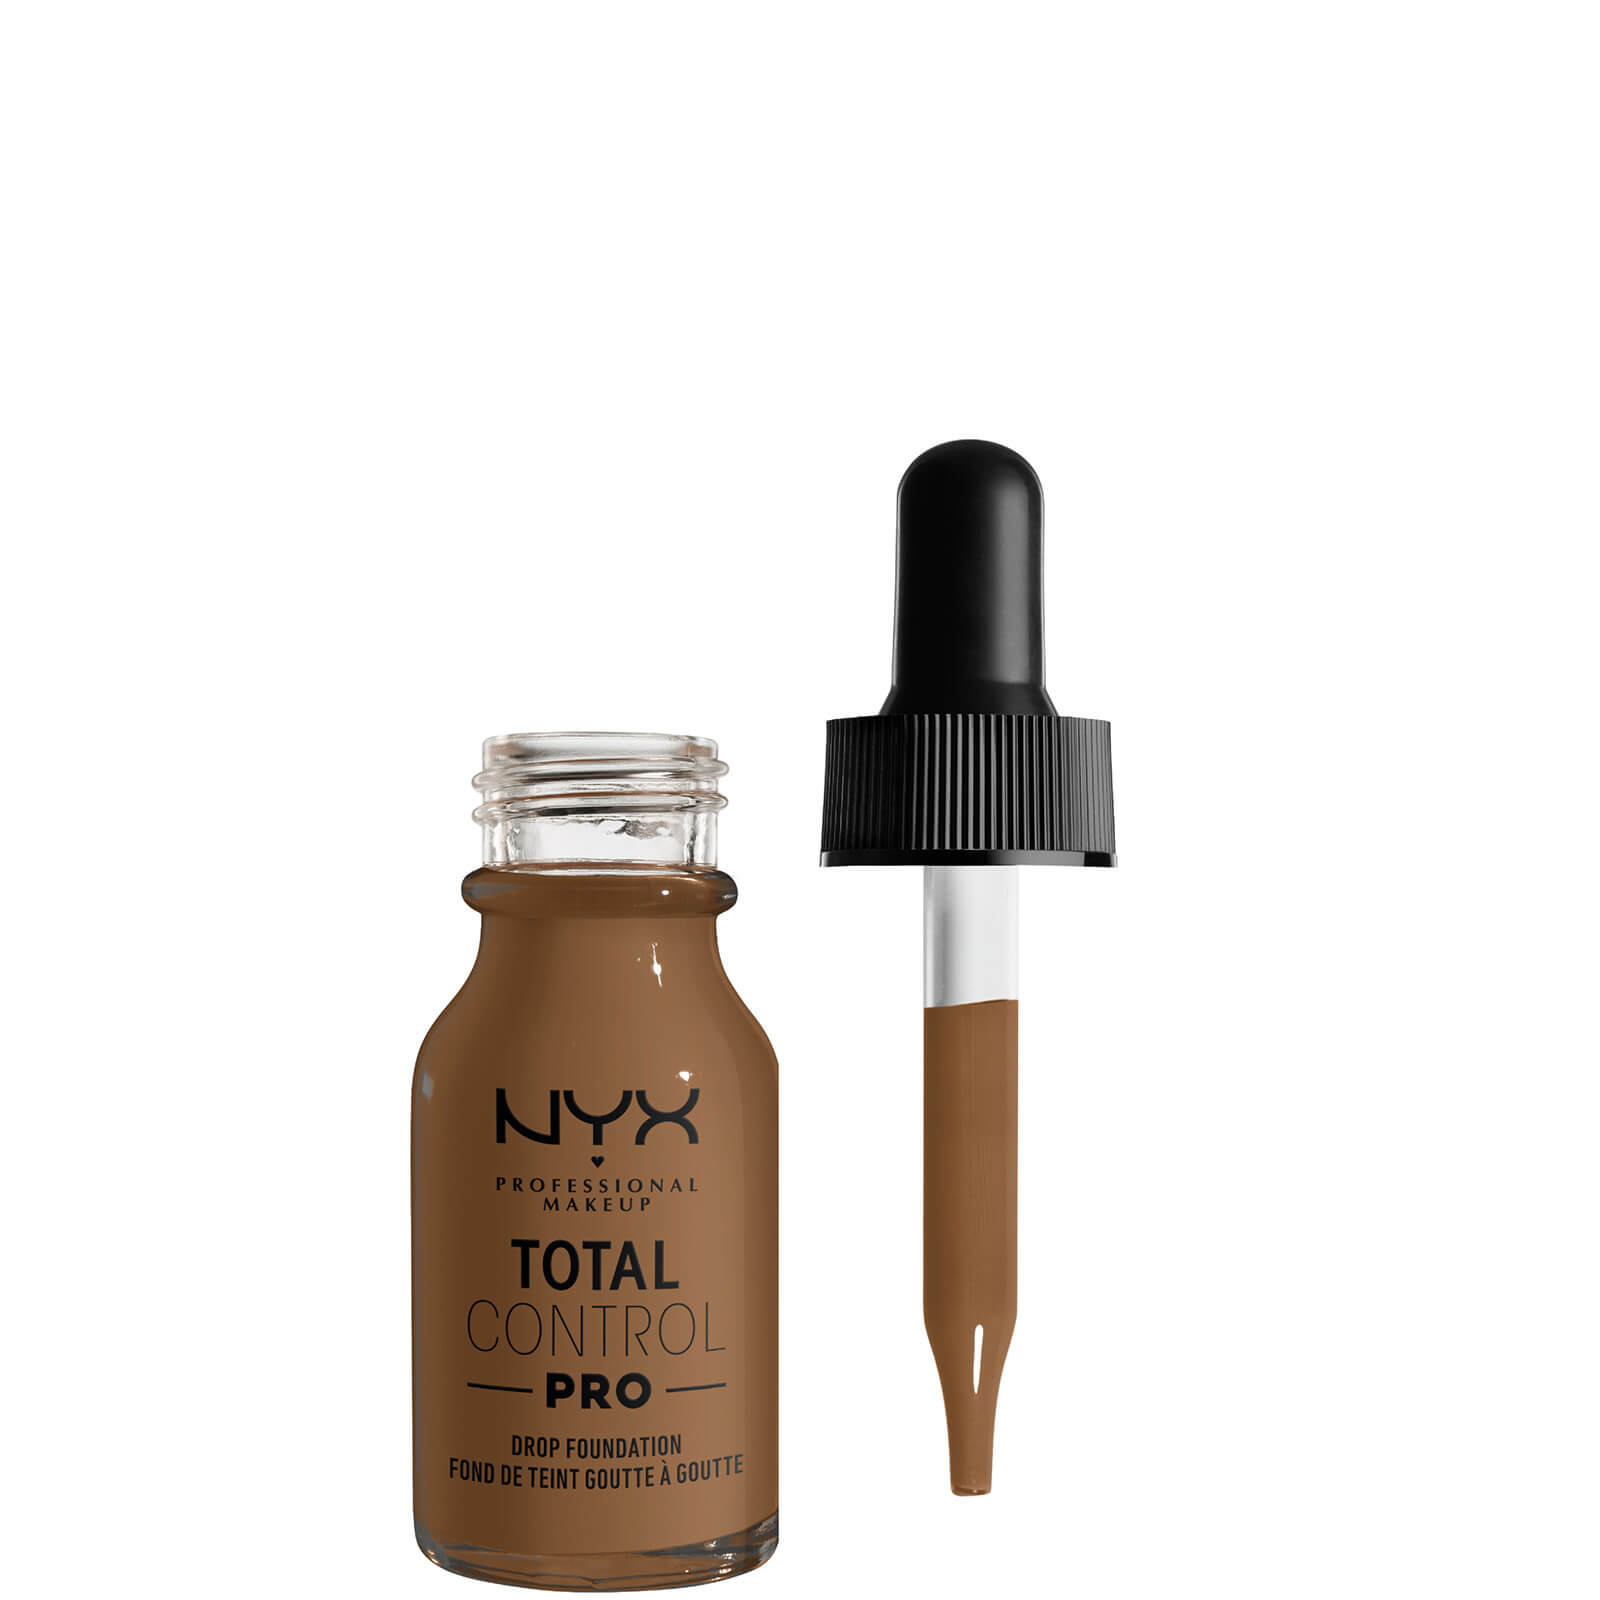 NYX Professional Makeup Total Control Pro Drop Controllable Coverage Foundation 13ml (Various Shades) - Deep Sable